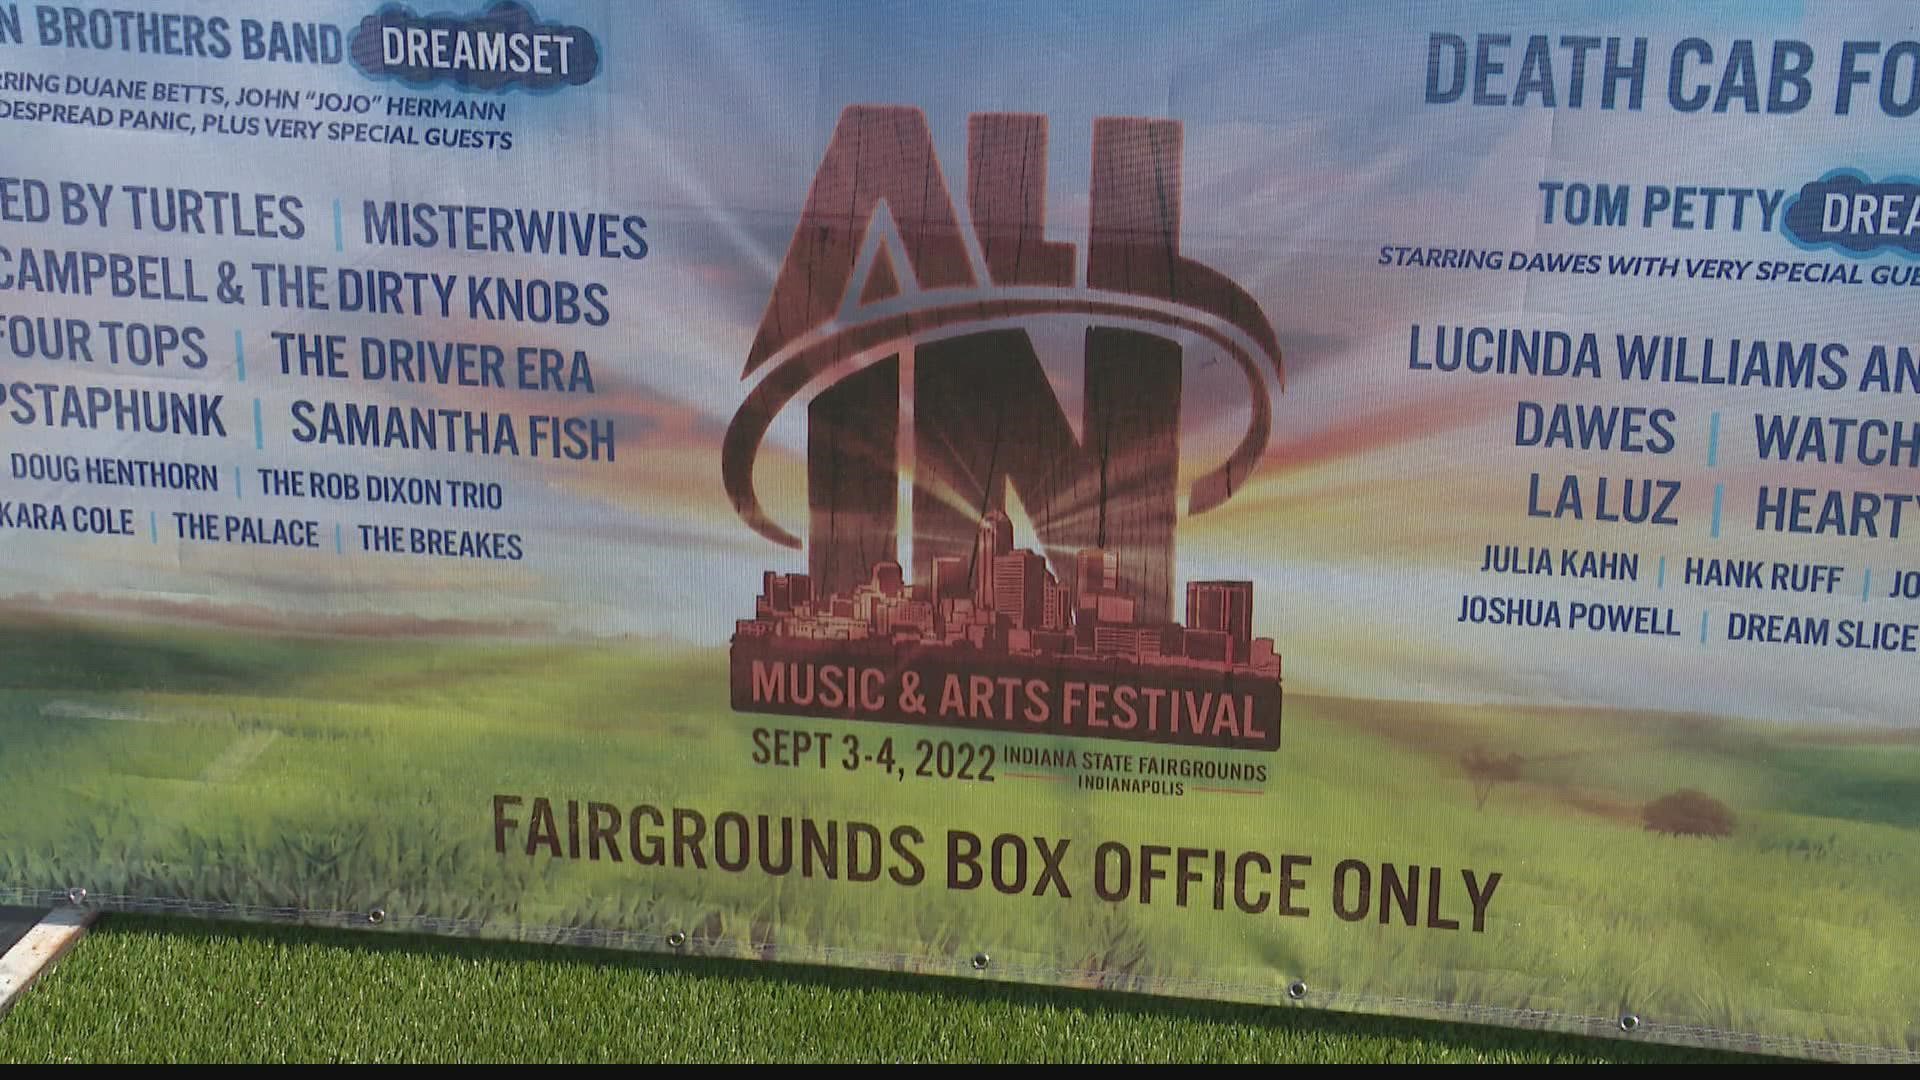 Performers at the inaugural Labor Day weekend festival include Daryl Hall & John Oates, Portugal. The Man, Cage The Elephant, John Fogerty and Death Cab For Cutie.